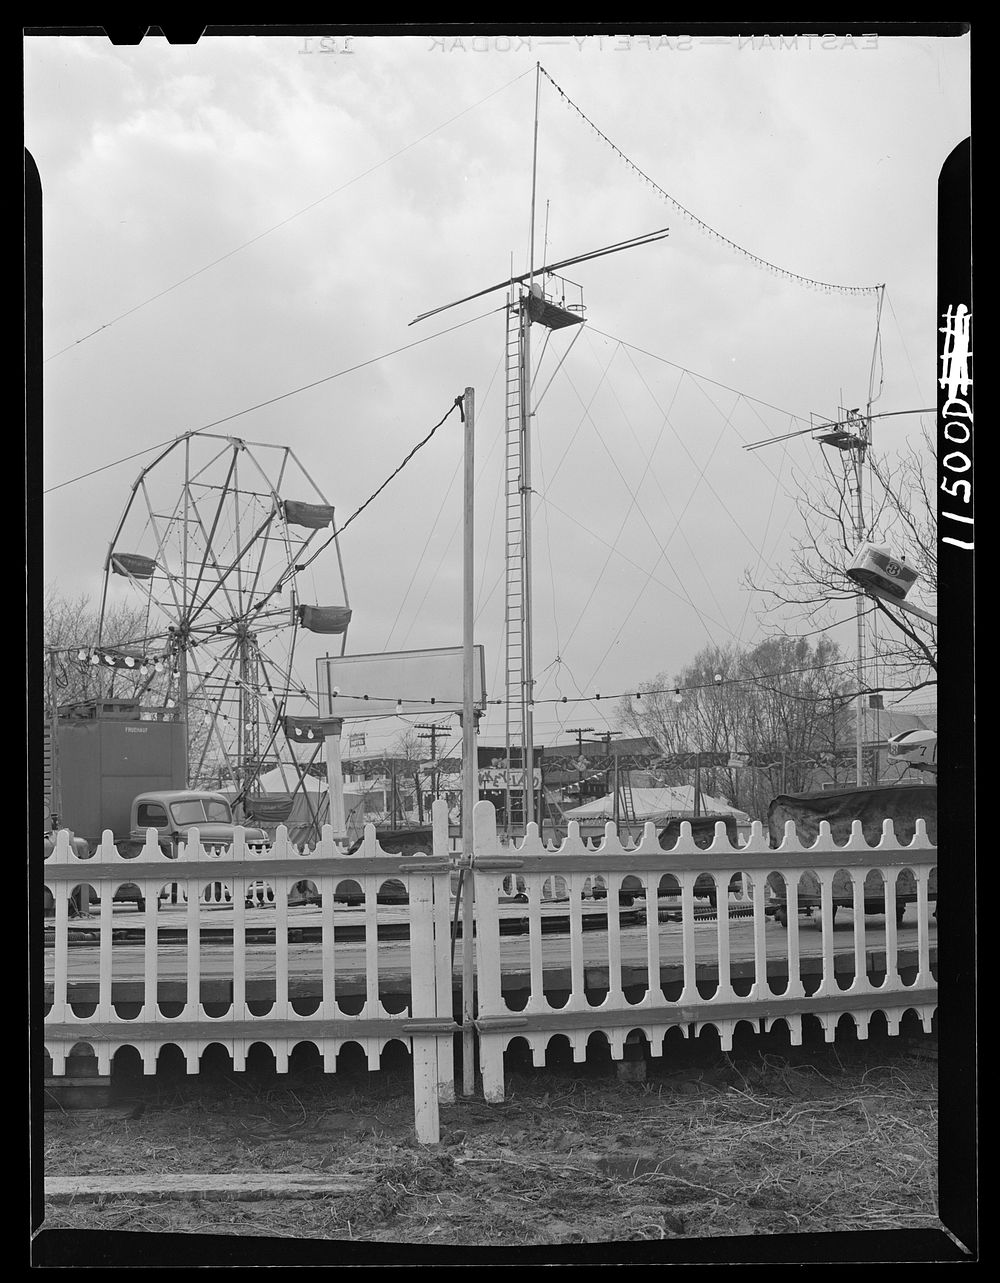 Washington, D.C. Traveling canival near the District line at Georgia Avenue. Sourced from the Library of Congress.